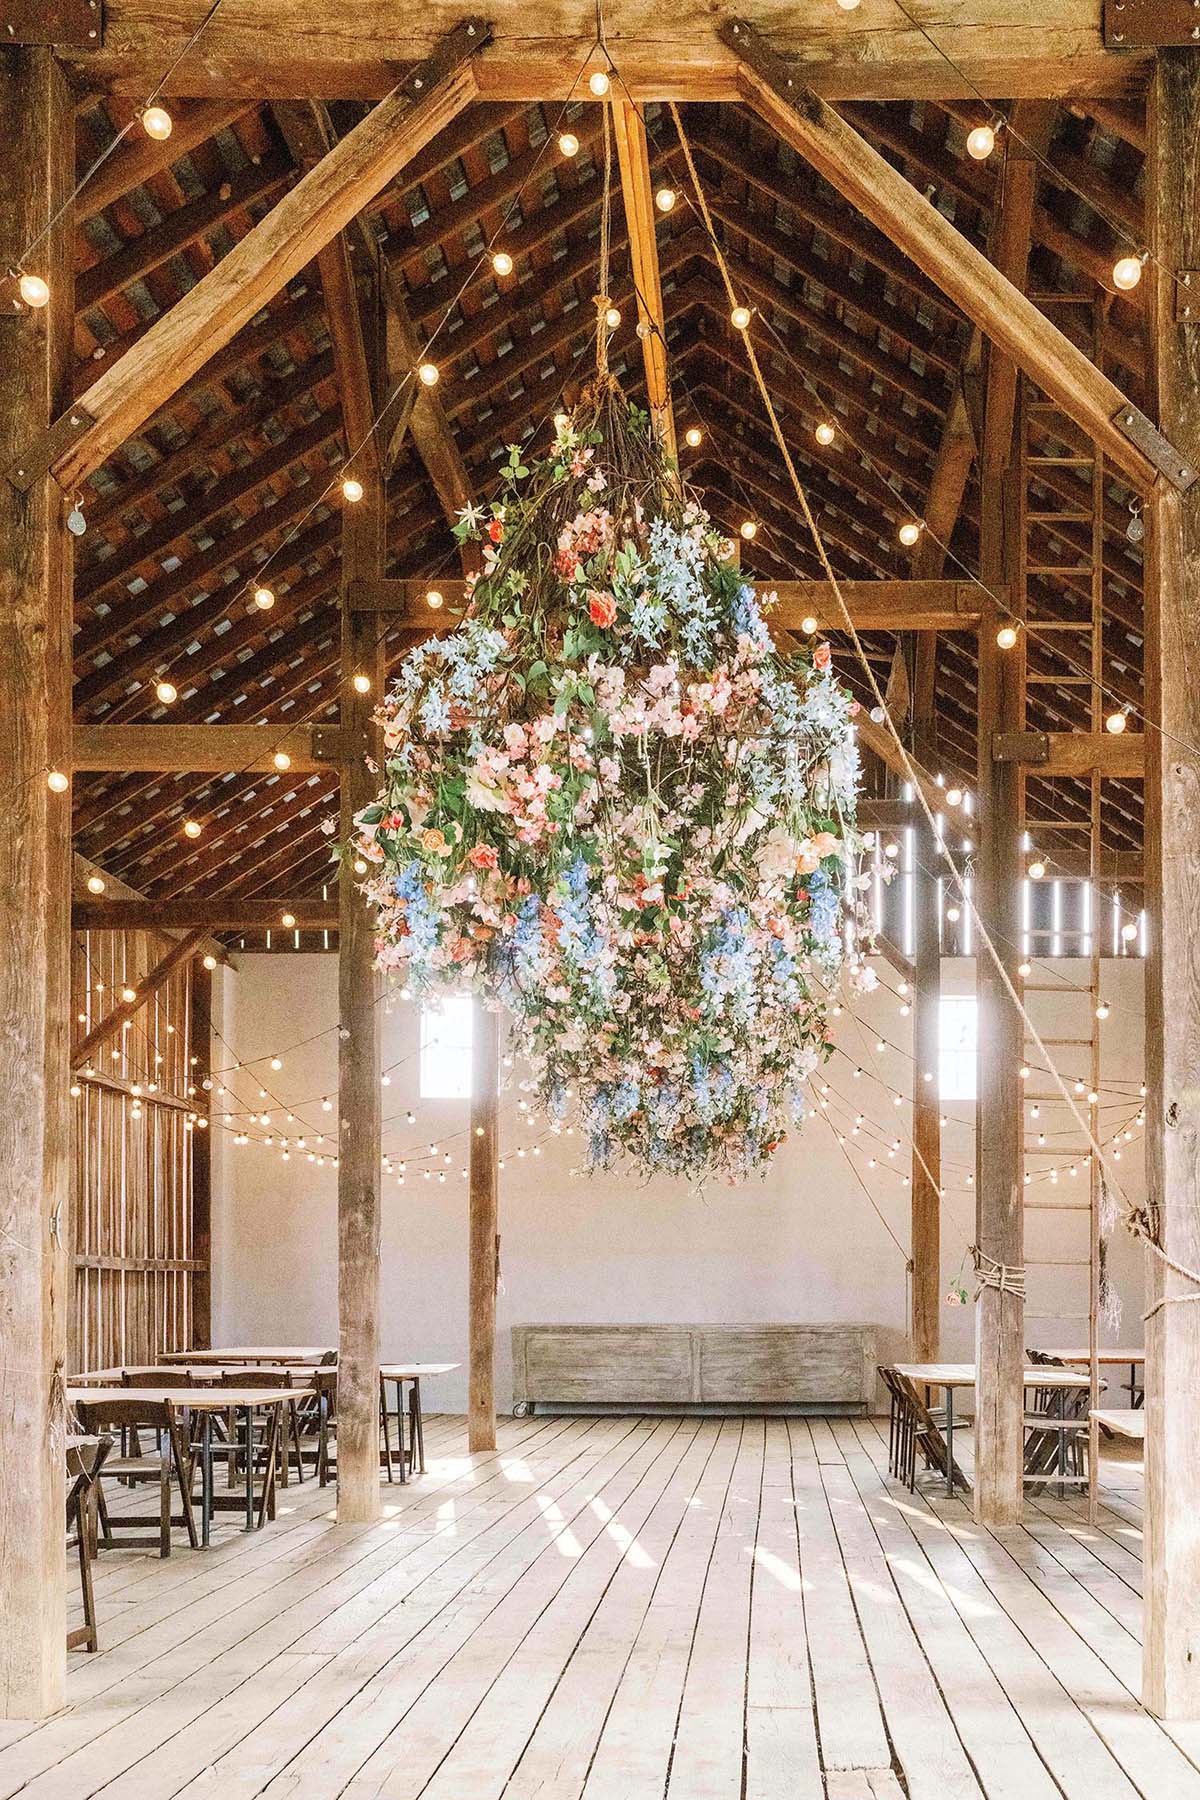 A floral arrangement hangs from the chandelier.